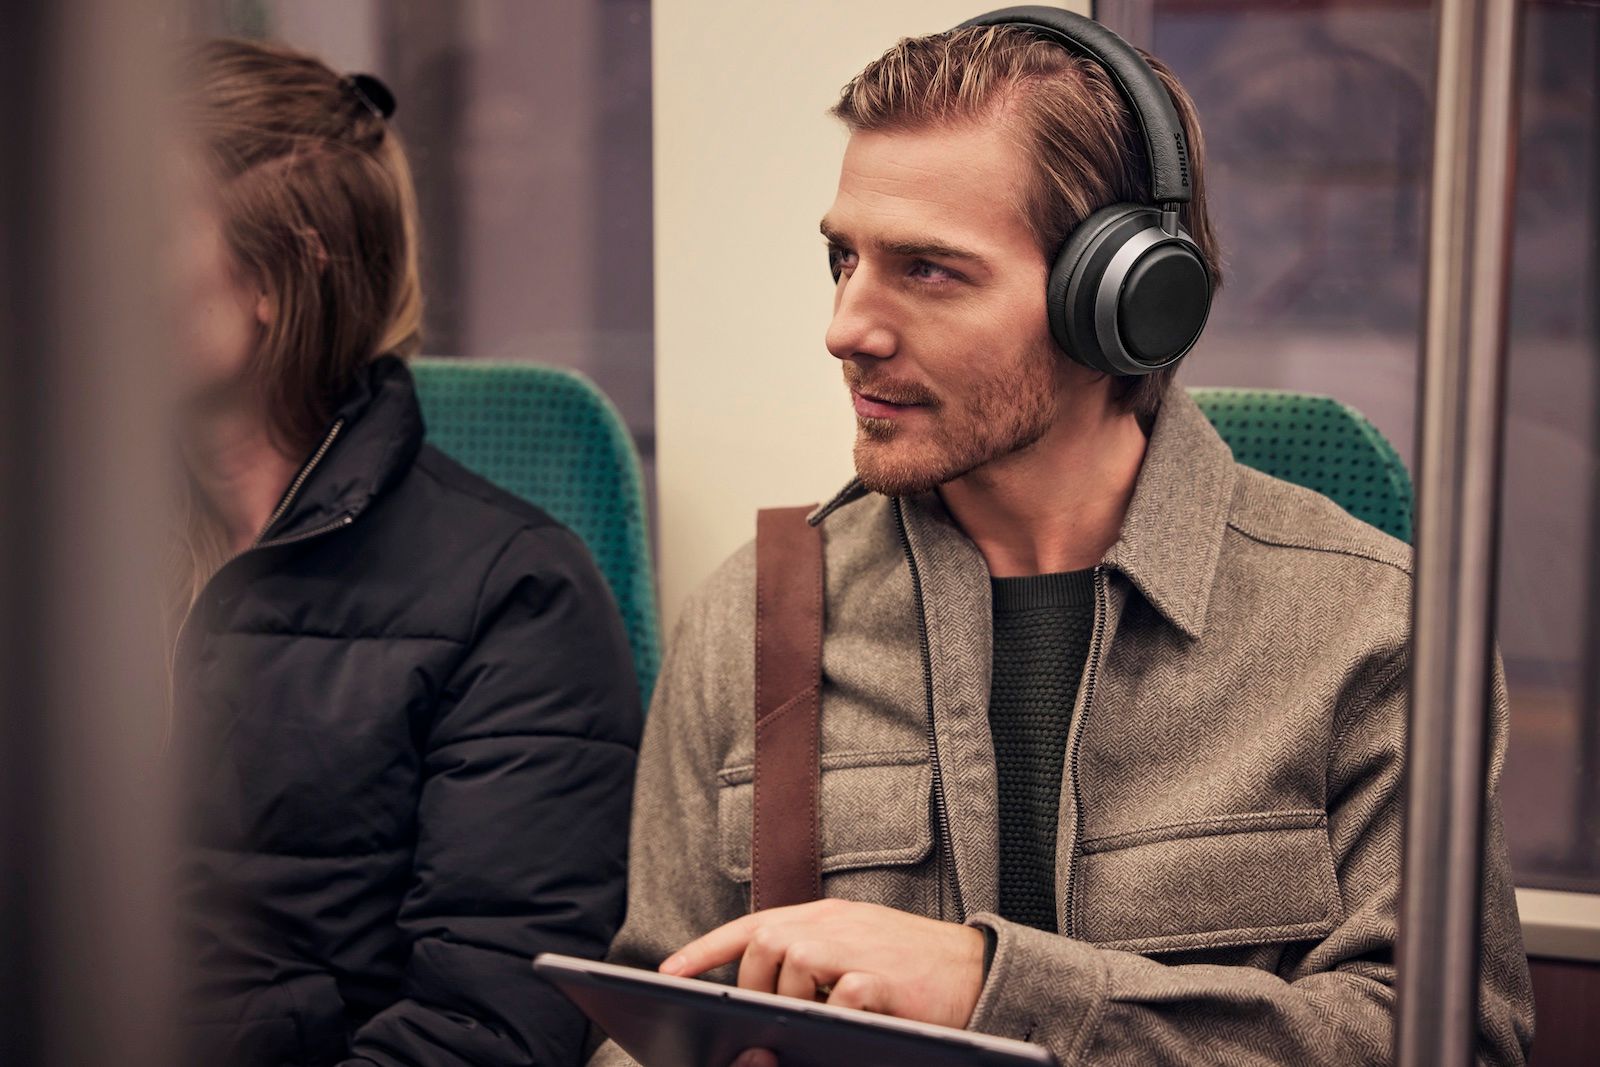 Philips adds to its Fidelio range with L4 over-ear and T2 in-ear headphones